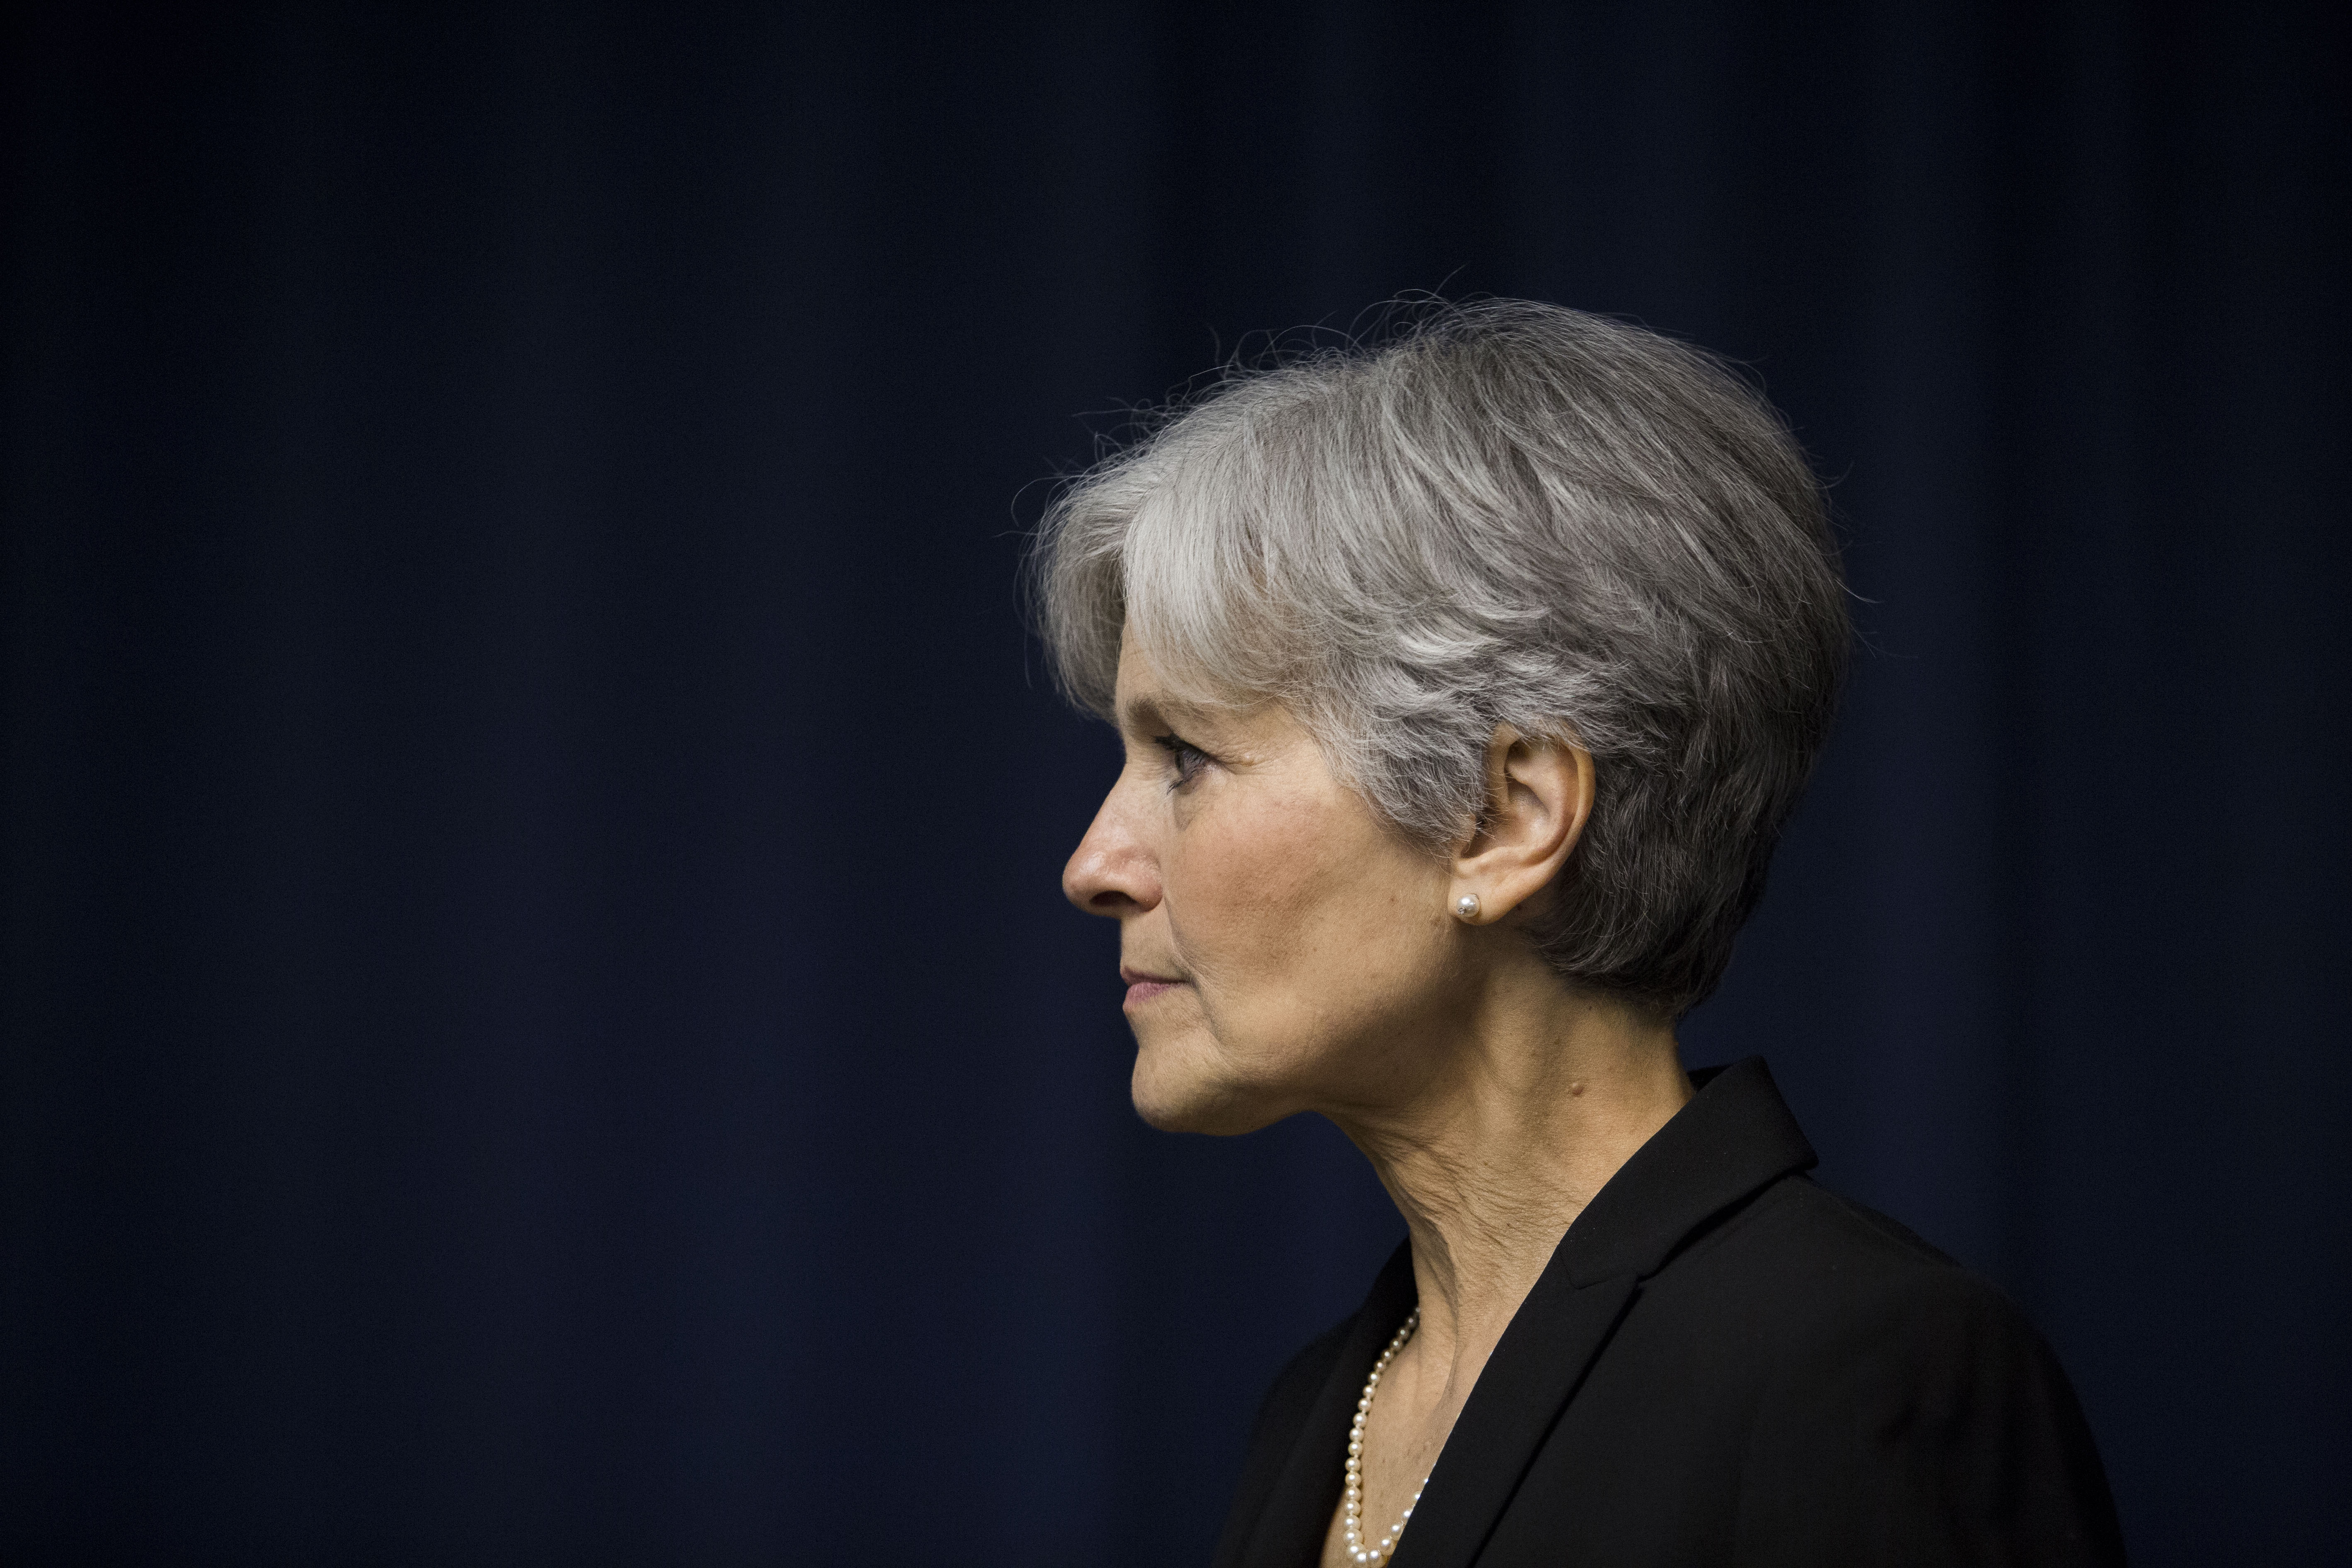 Jill Stein is seen after she announced that she will seek the Green Party's presidential nomination, at the National Press Club, June 23, 2015 in Washington, DC. Stein also ran for president in 2012 on the Green Party ticket. 